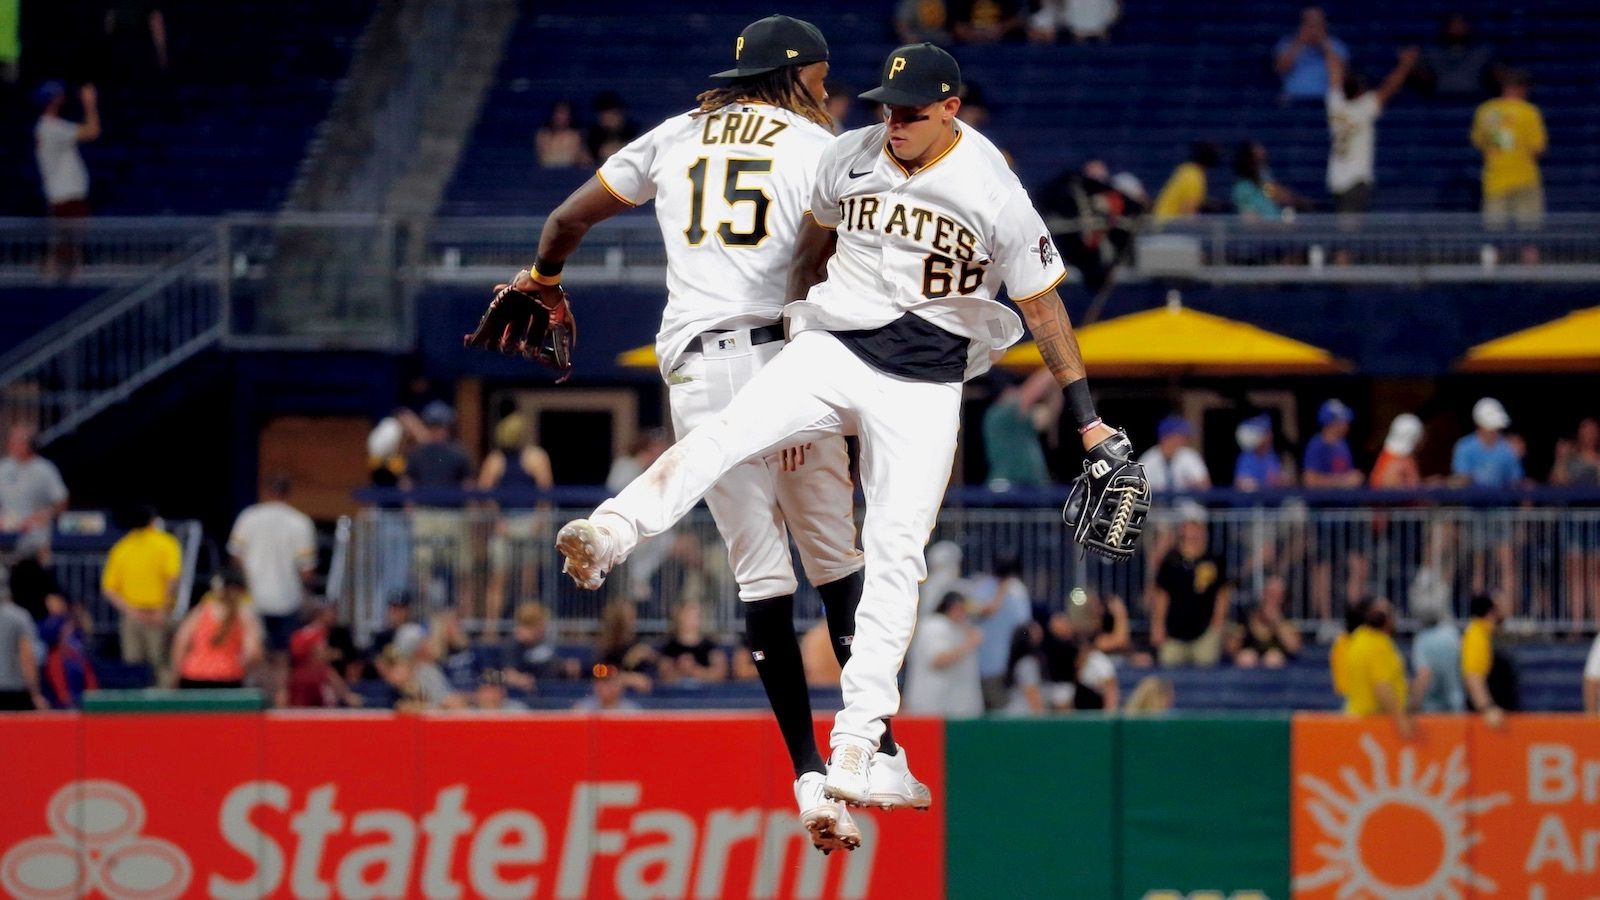 Oneil Cruz lives up to hype in first Pirates game of the season